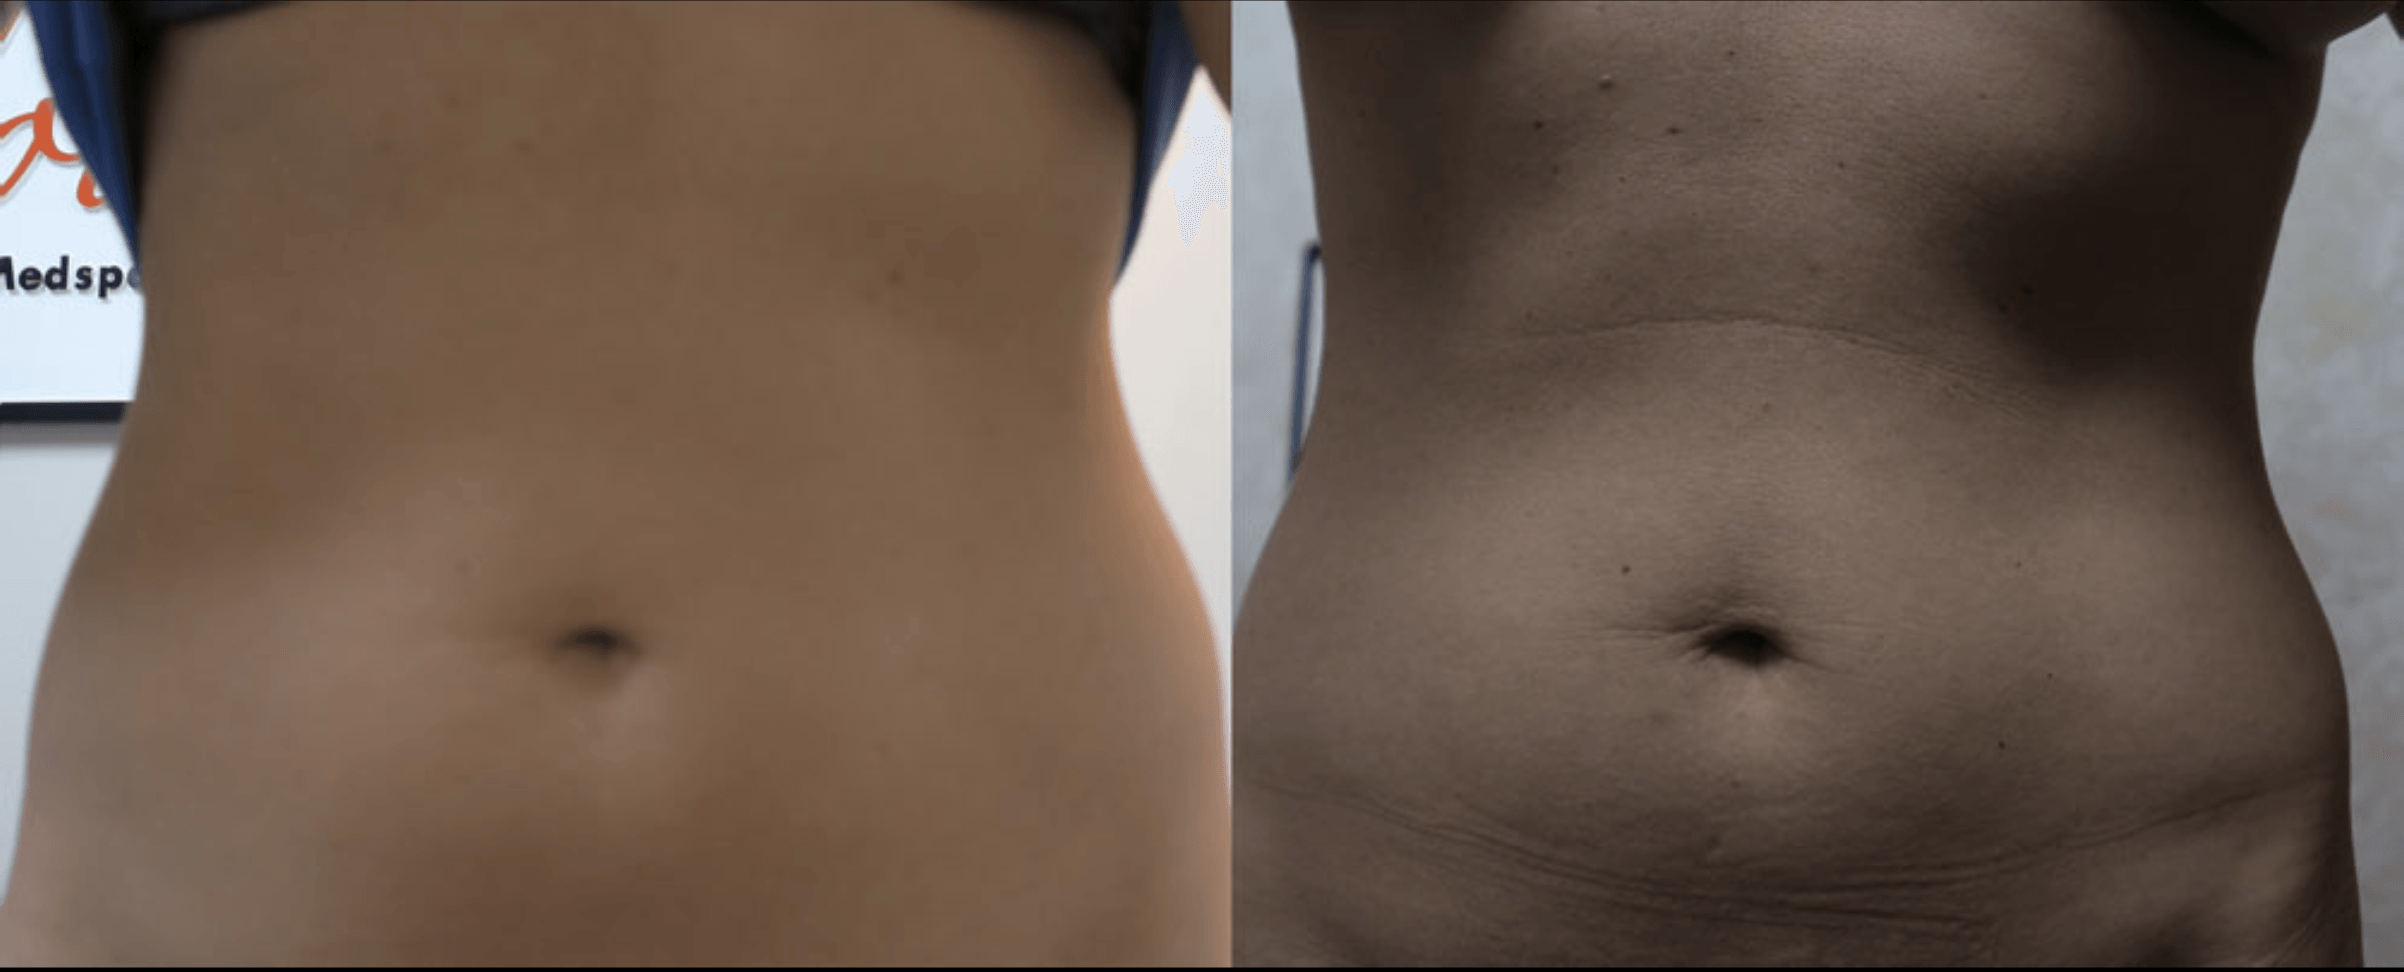 Joules MedSpa and Laser Center: first photo shows after of tighter skin and a tighter belly